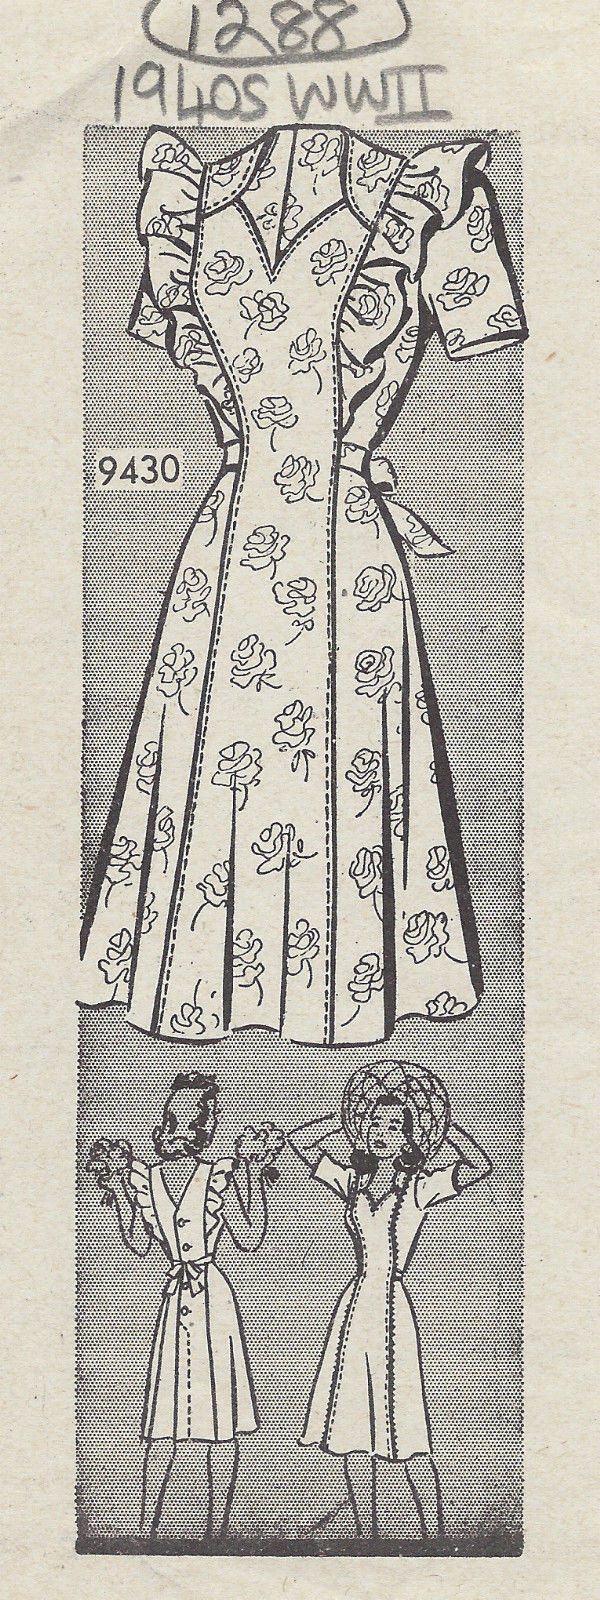 1940s-Vintage-Sewing-Pattern-PINAFORE-DRESS-B34-1288R-By-Marian-Martin-261510019608